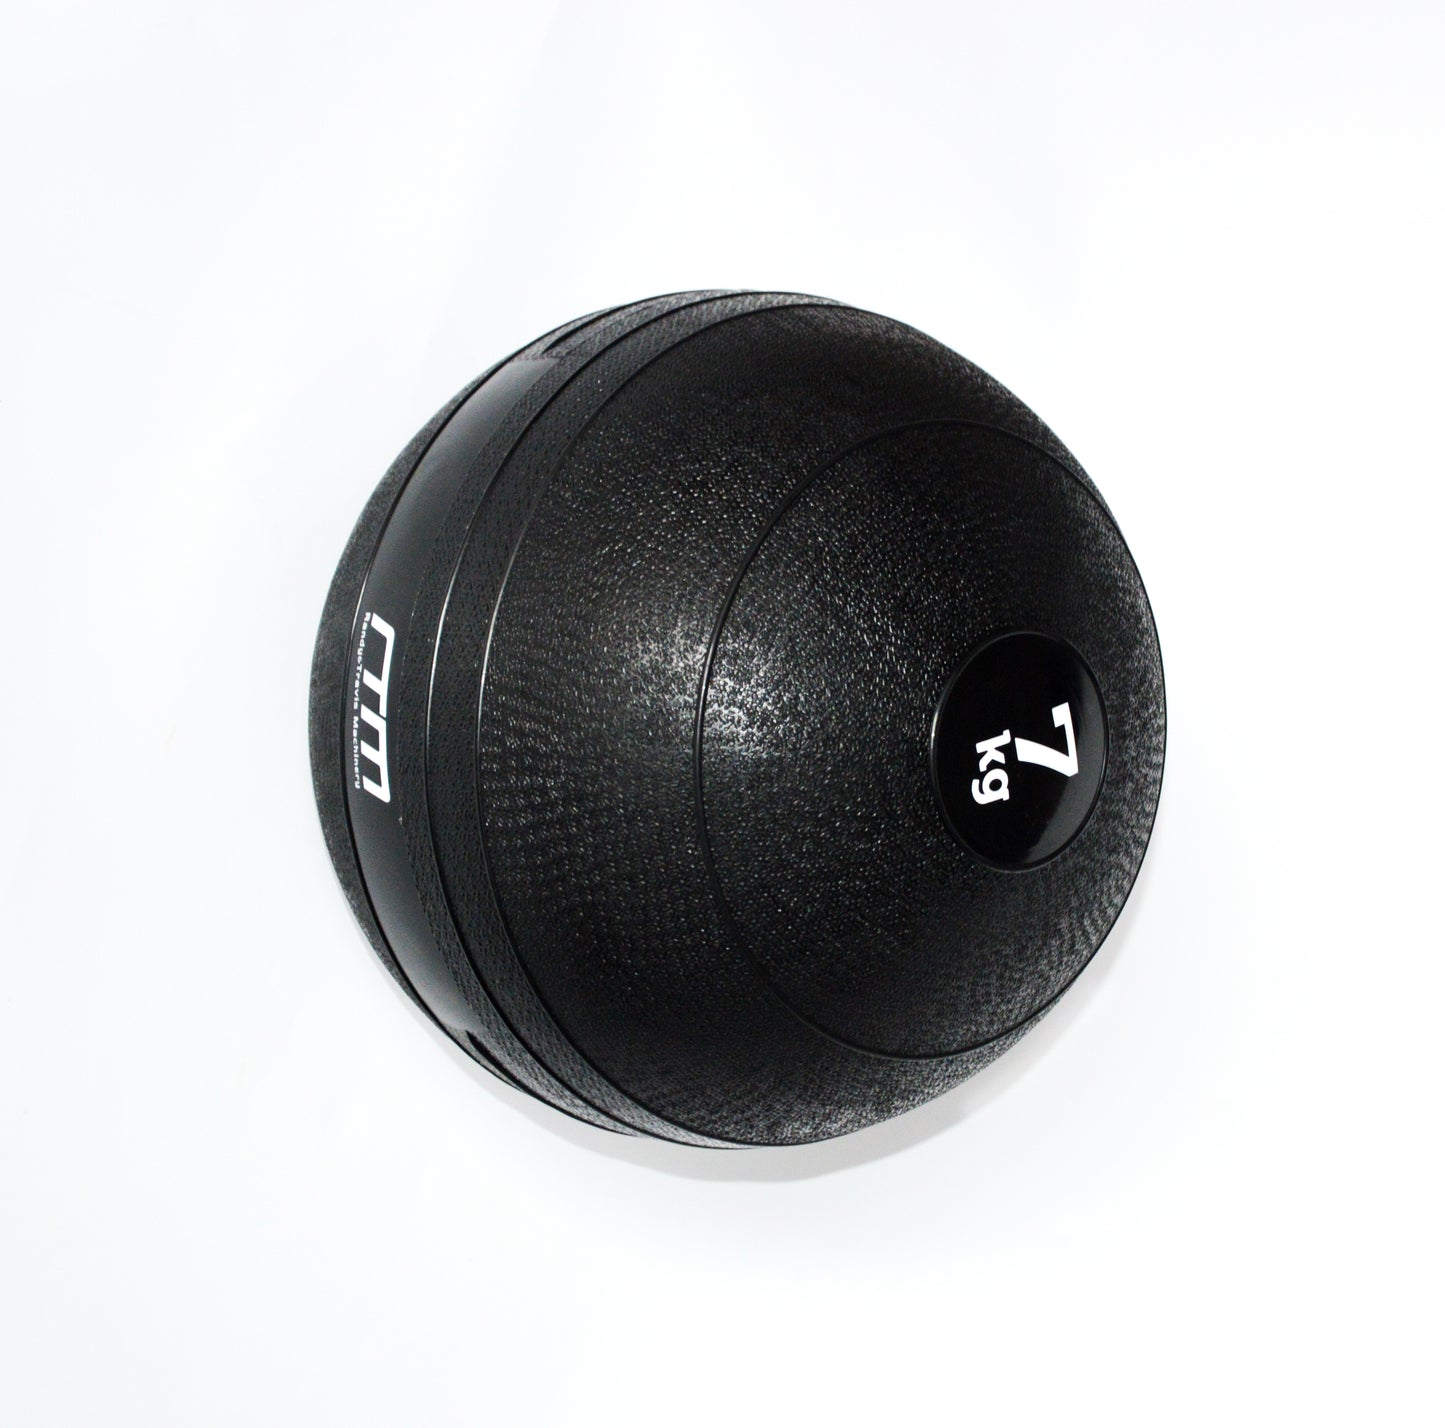 7kg Slam Ball No Bounce Crossfit Fitness MMA Boxing BootCamp - image2